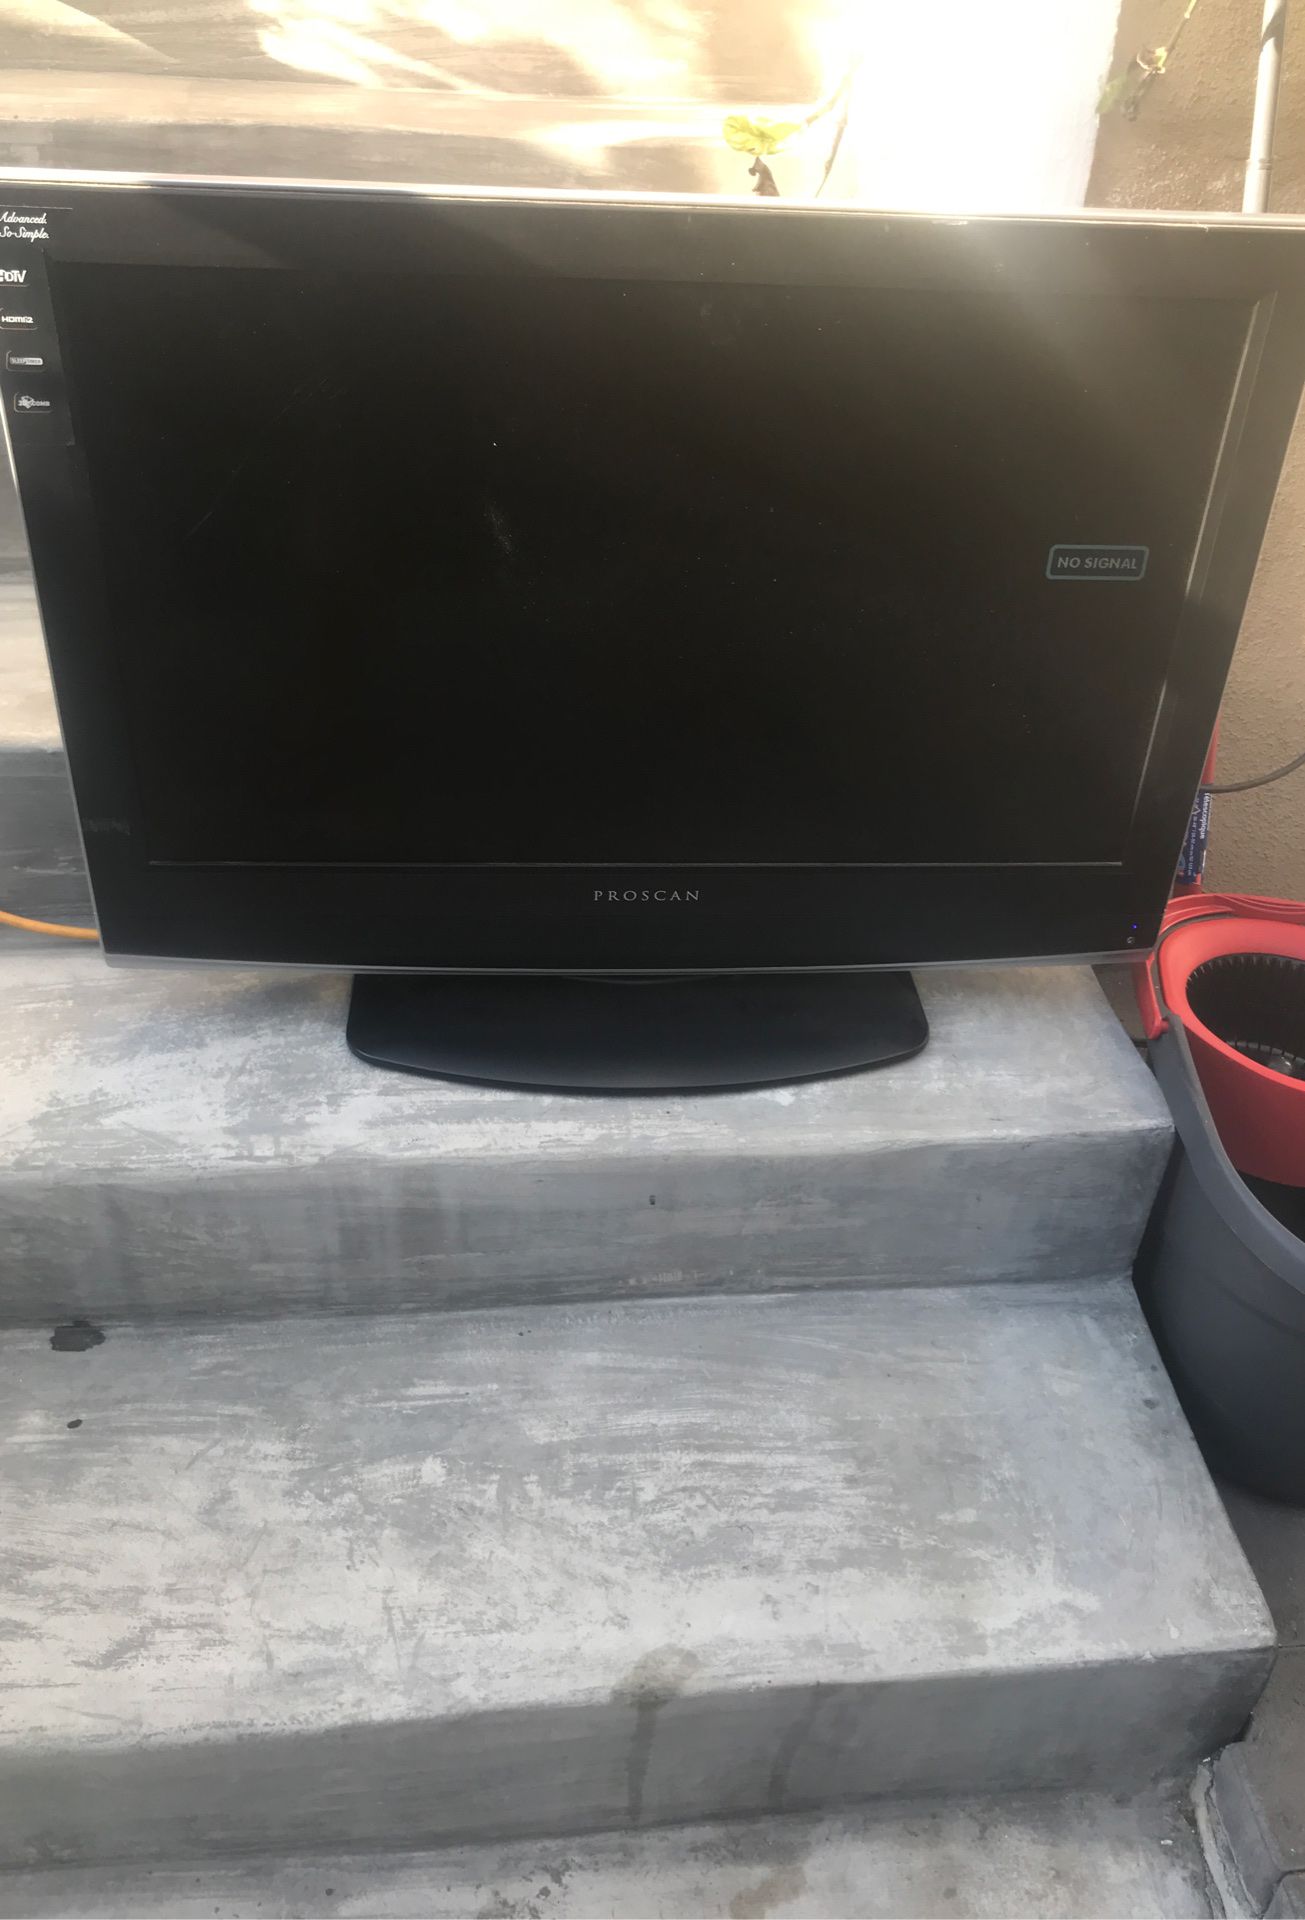 Proscan 32” lcd tv for sale